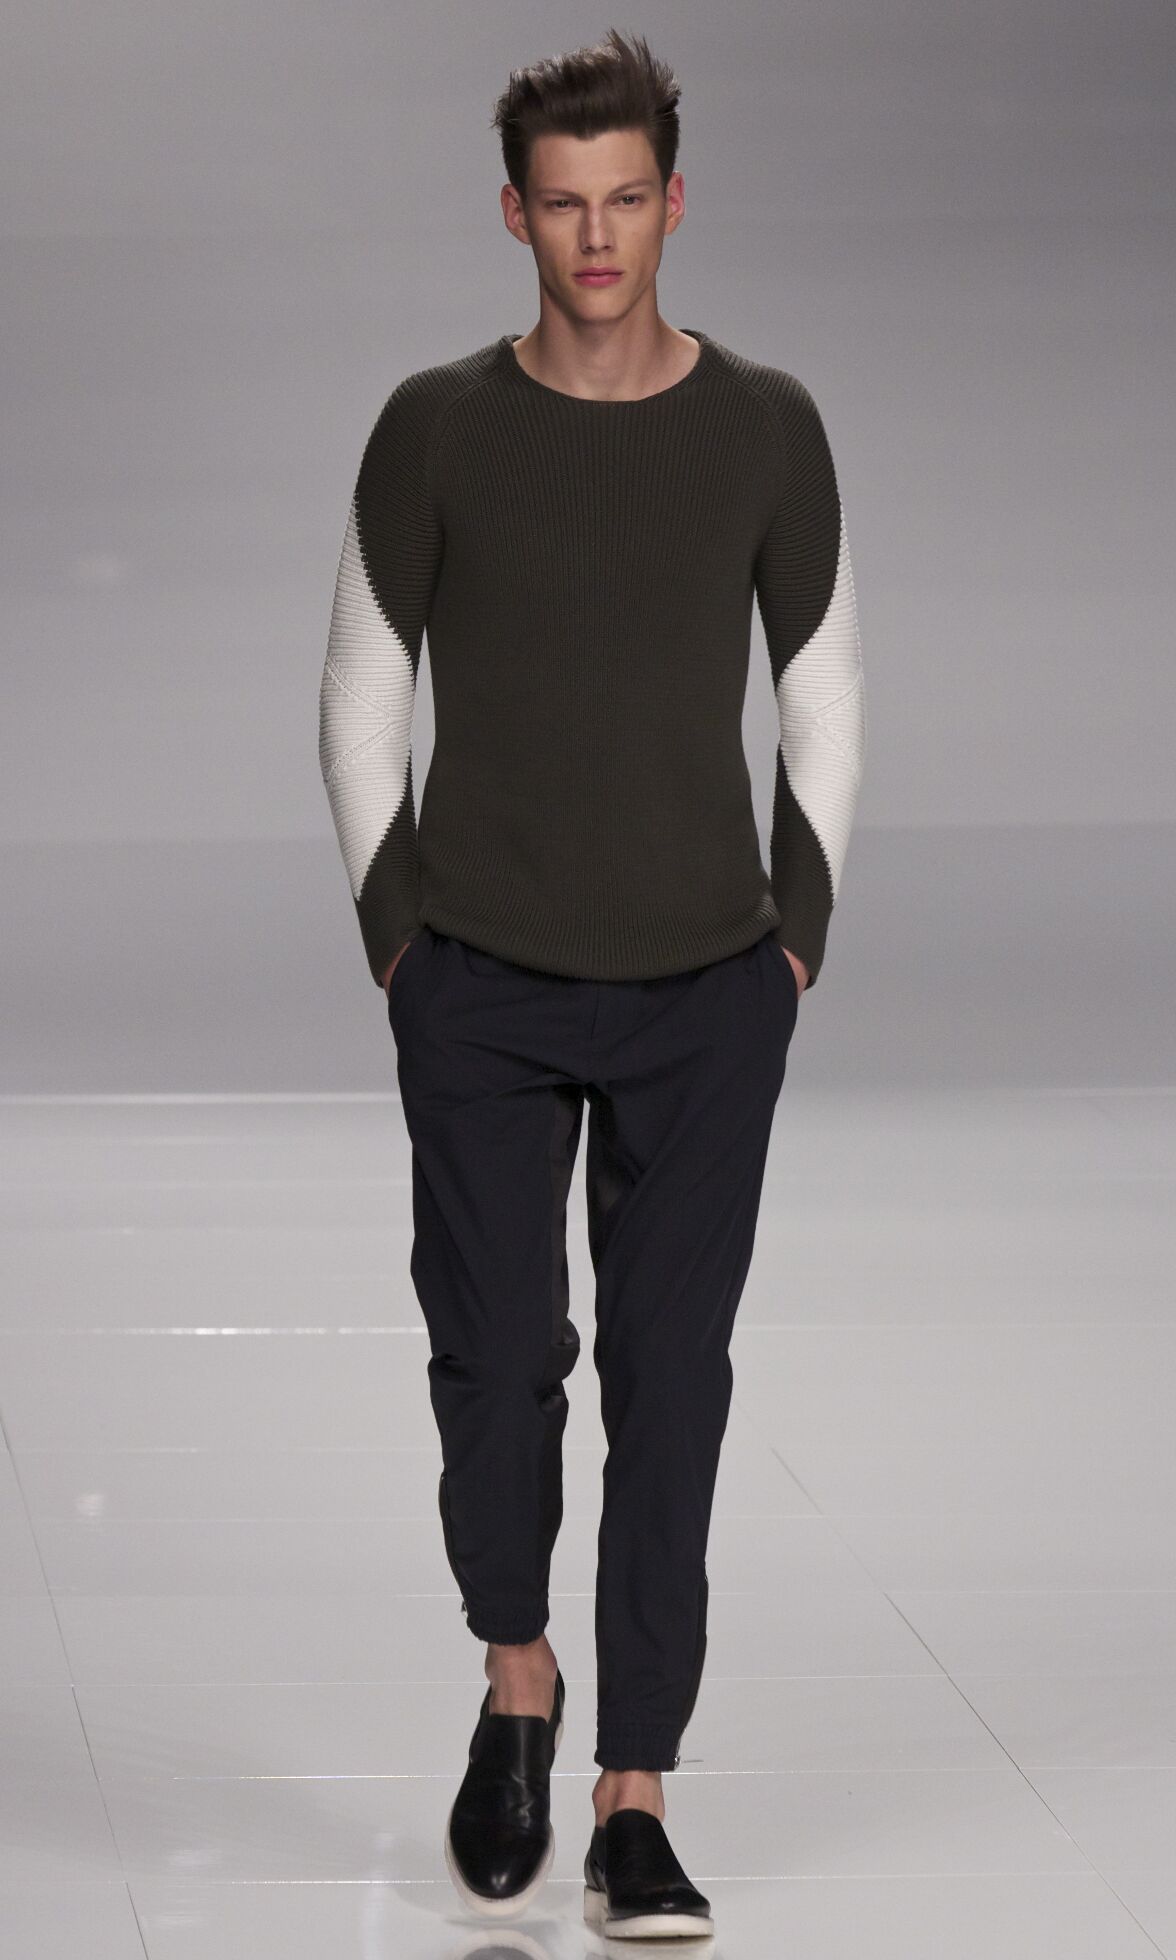 ICEBERG SPRING SUMMER 2014 MEN’S COLLECTION | The Skinny Beep